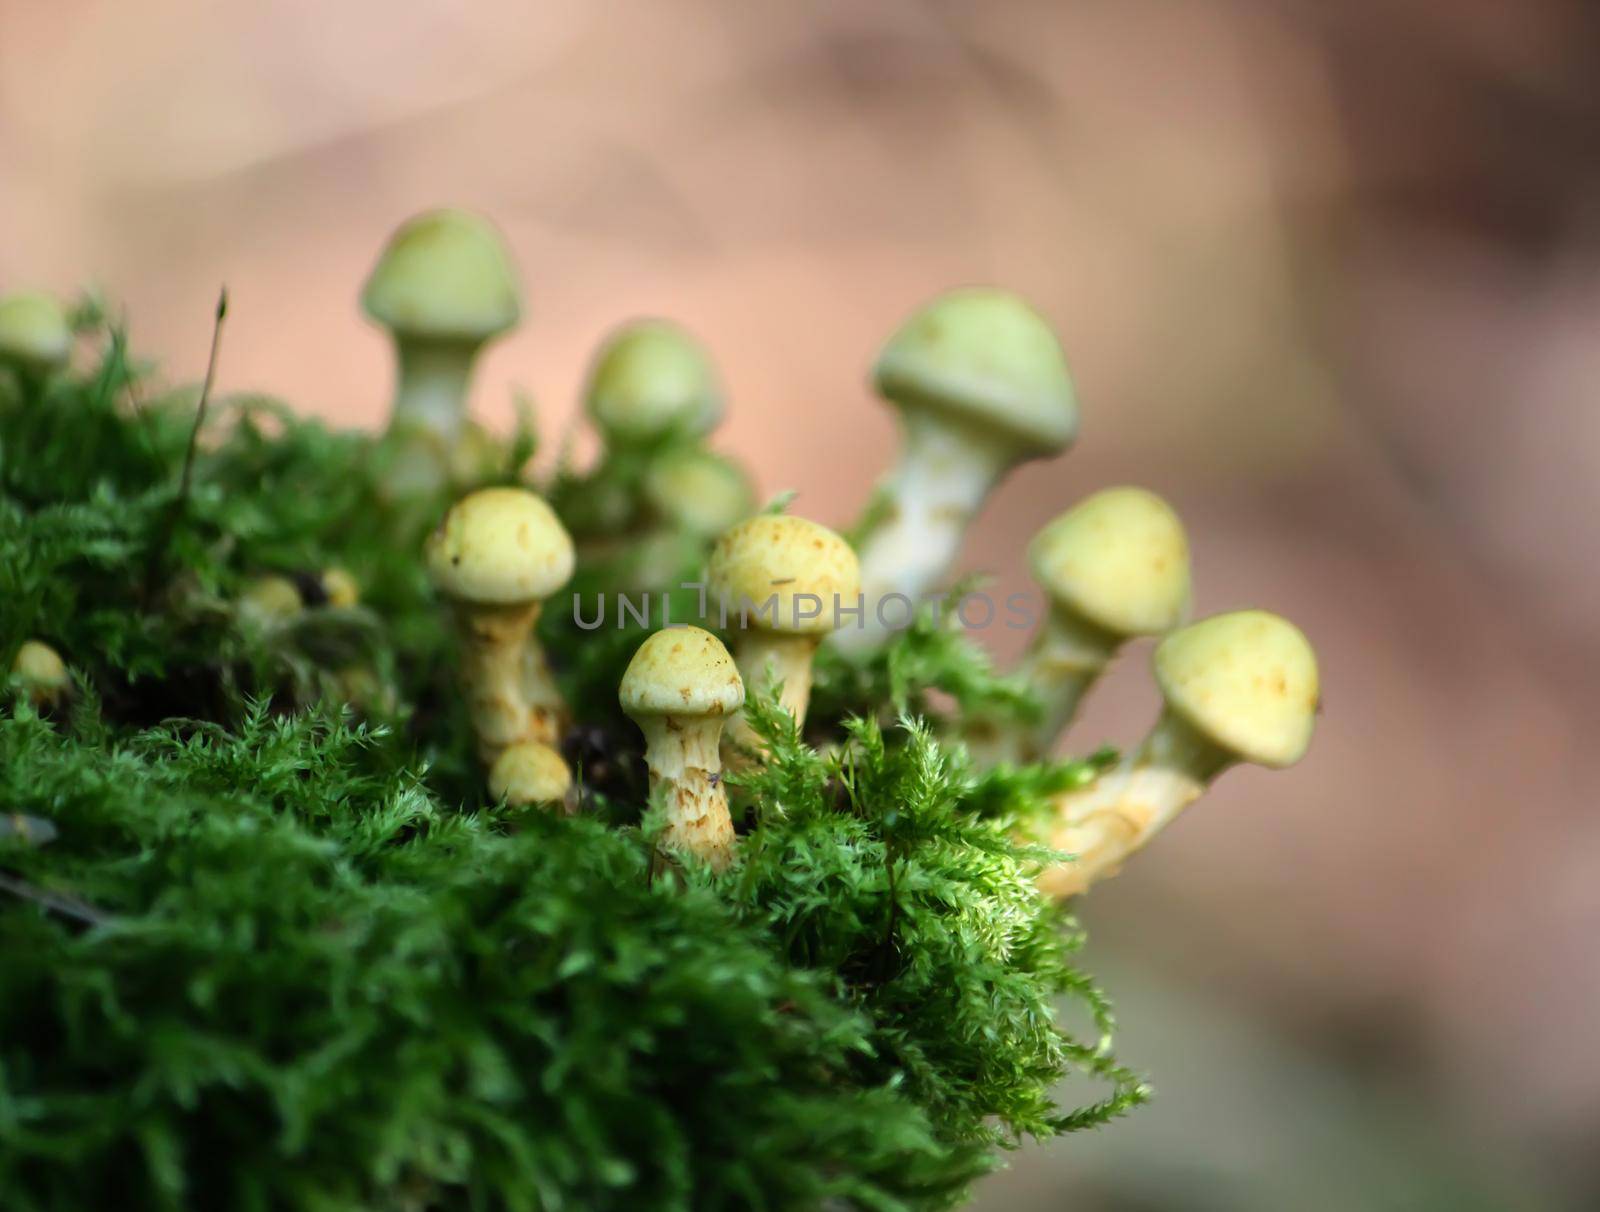 Group of beautiful mushrooms in the moss on a log